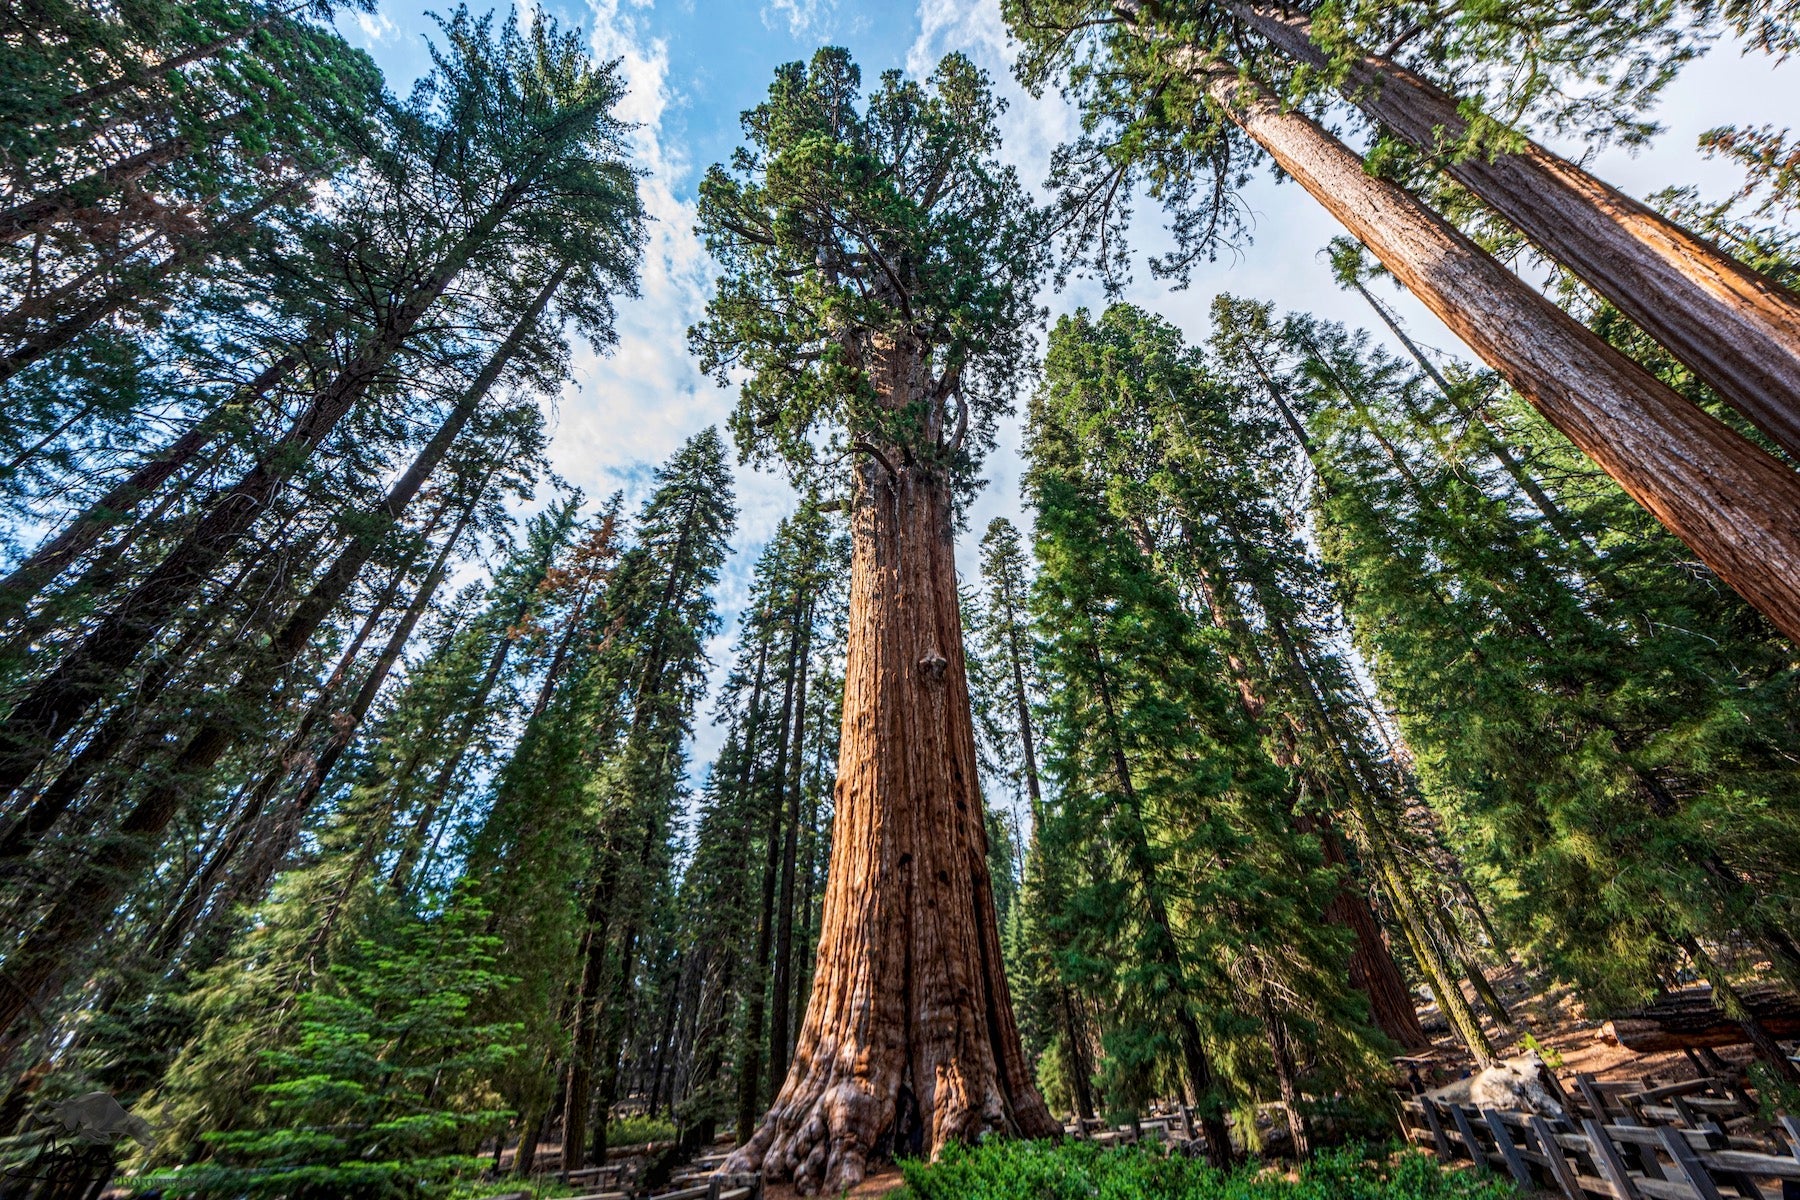 The 9 Oldest, Tallest, and Biggest Trees in the World - One Tree Planted